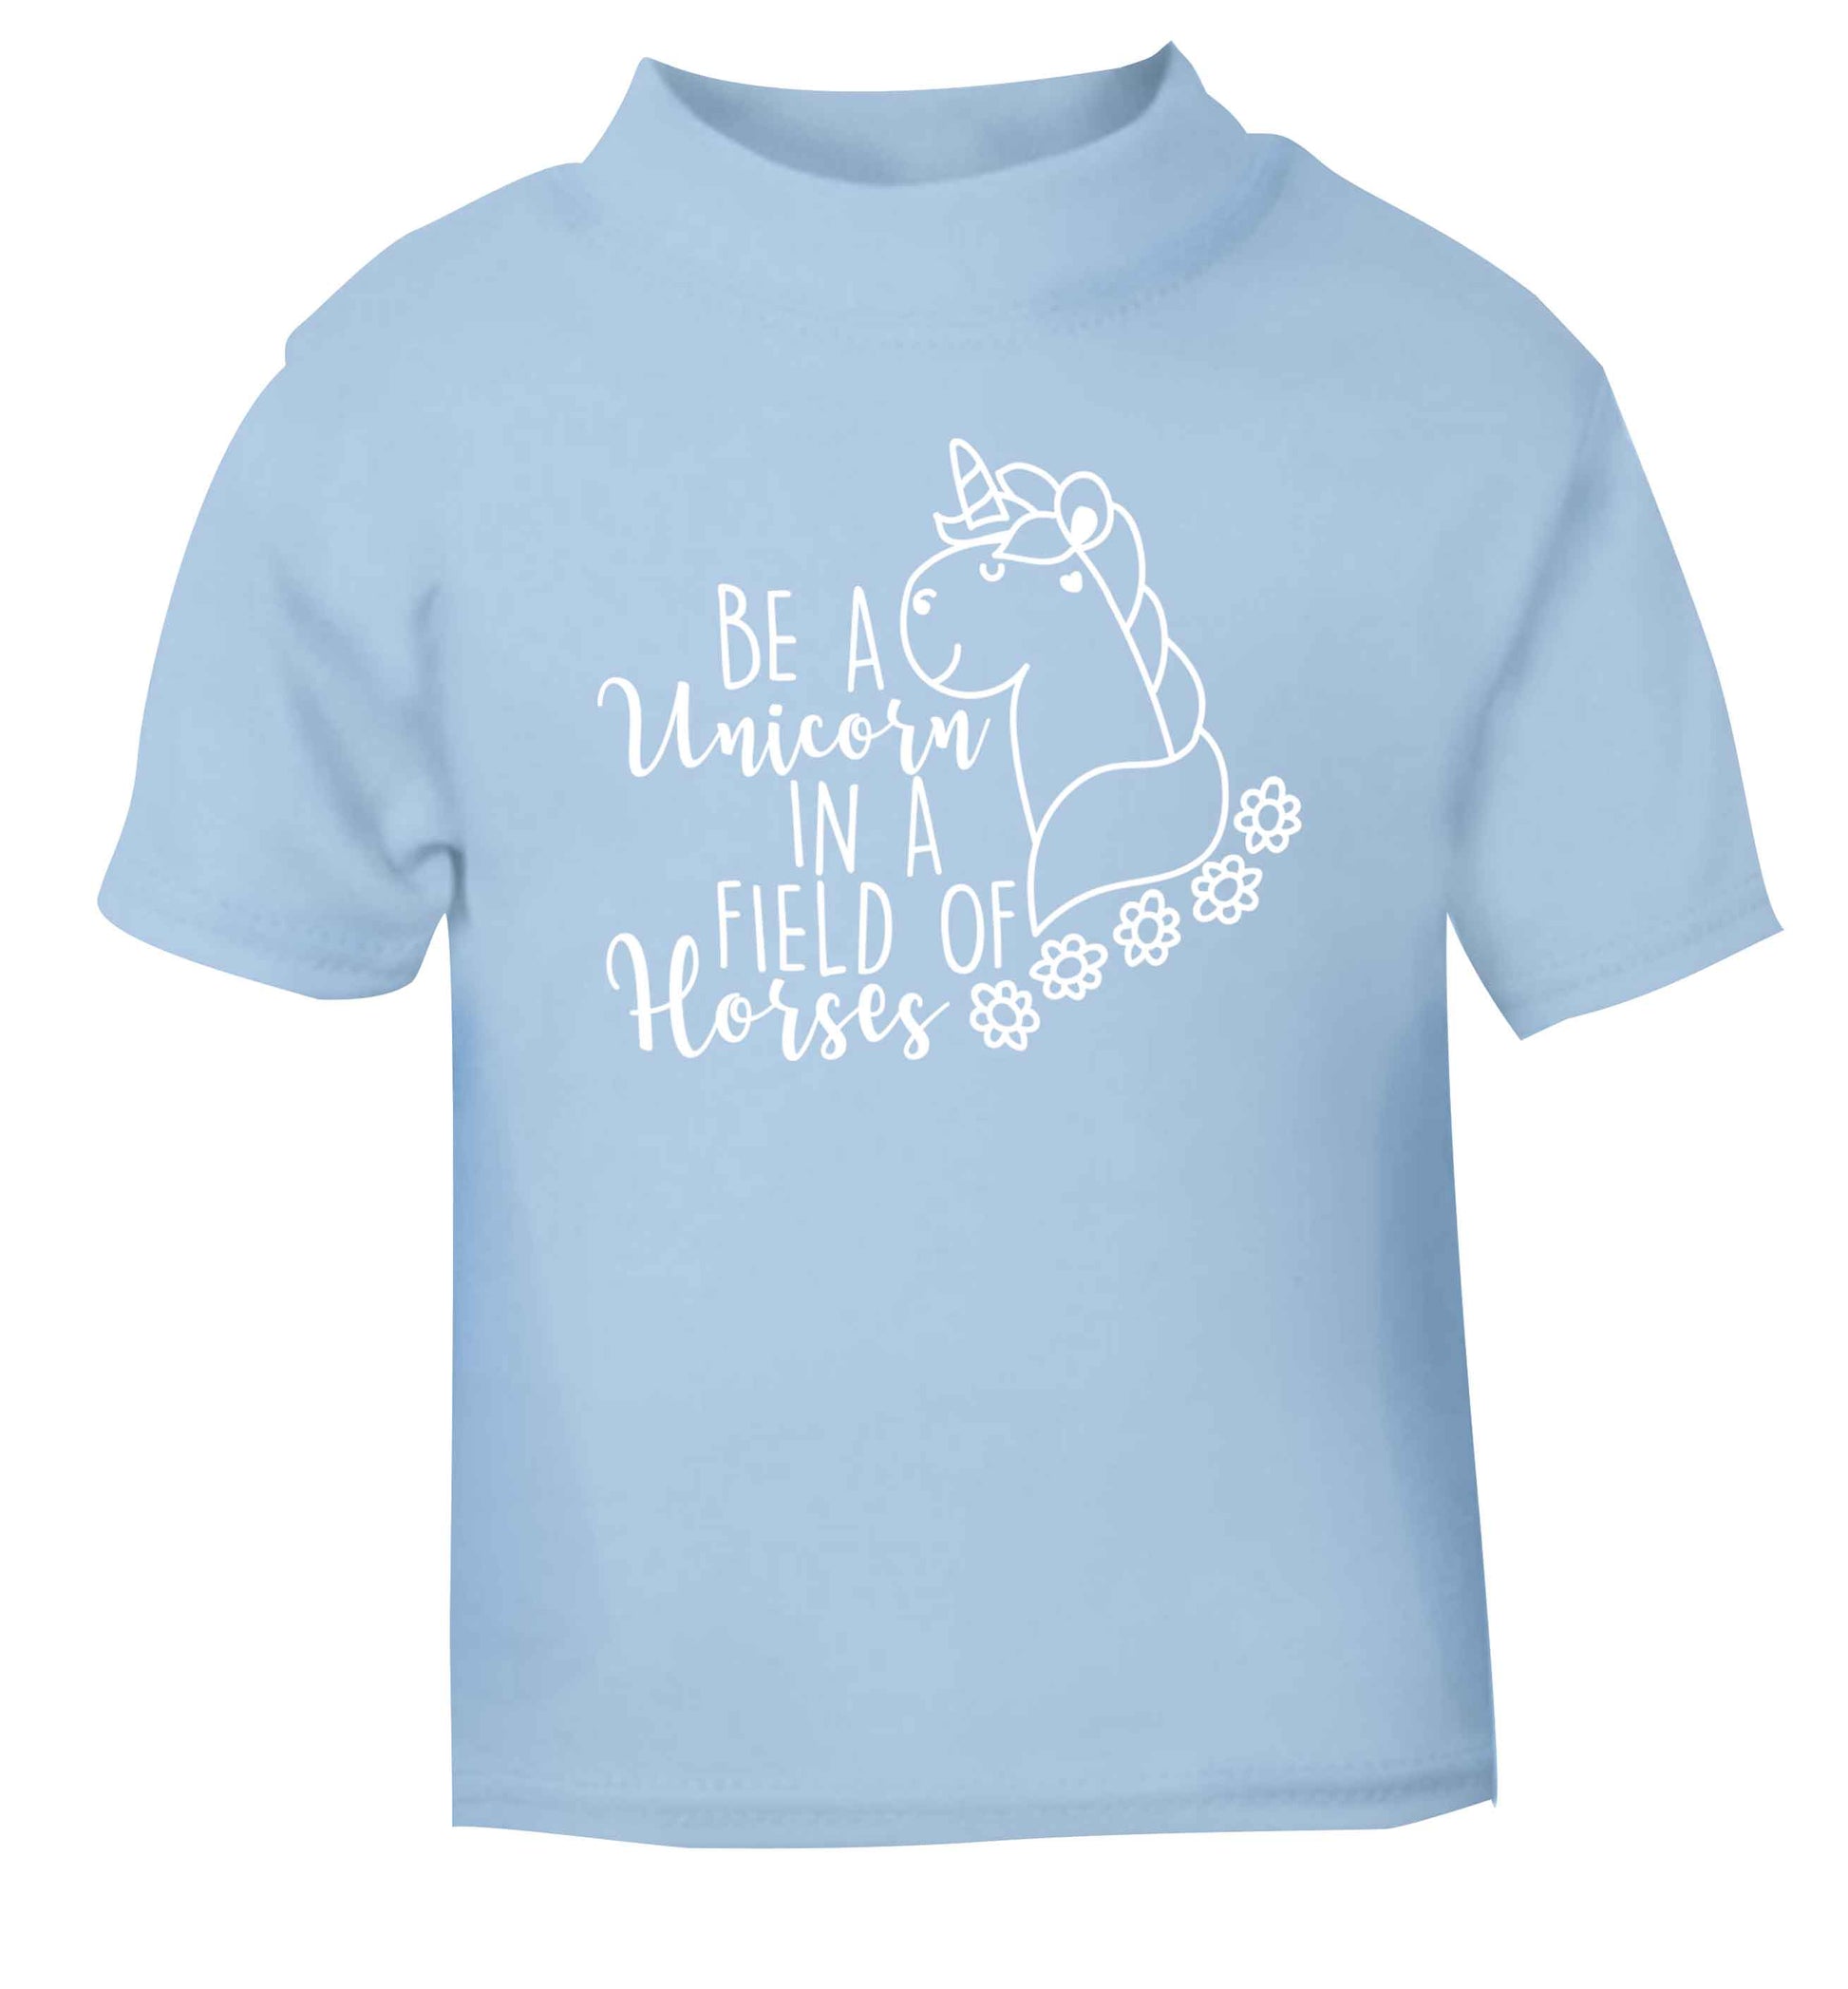 Be a unicorn in a field of horses light blue Baby Toddler Tshirt 2 Years